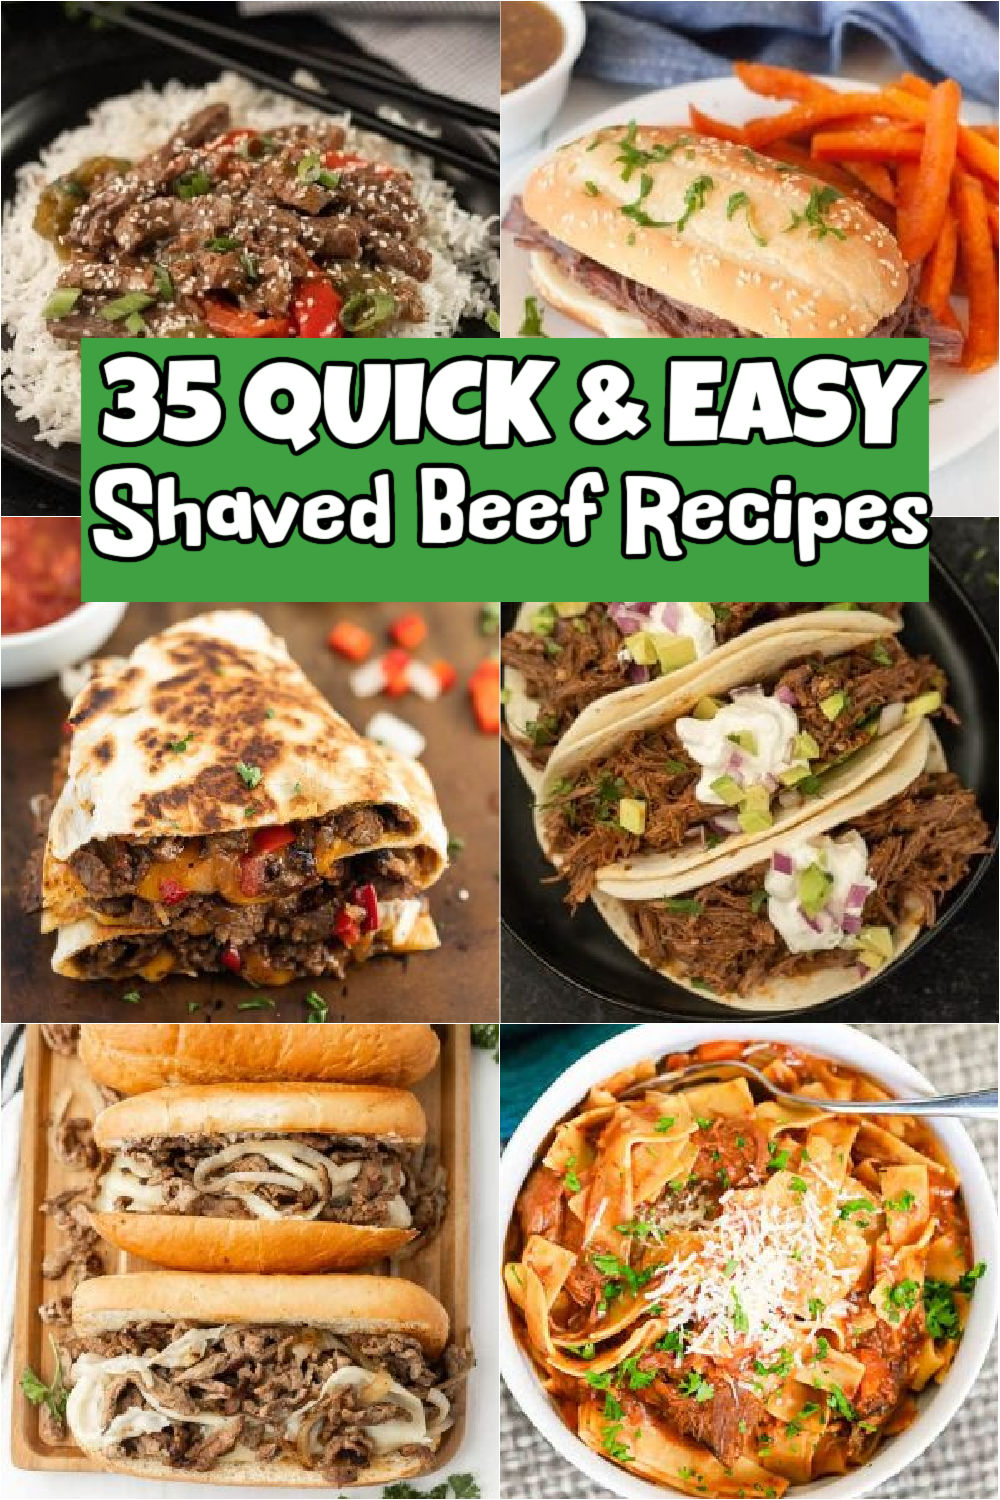 Shaved Beef Recipes - 35 Recipes with Shaved Beef